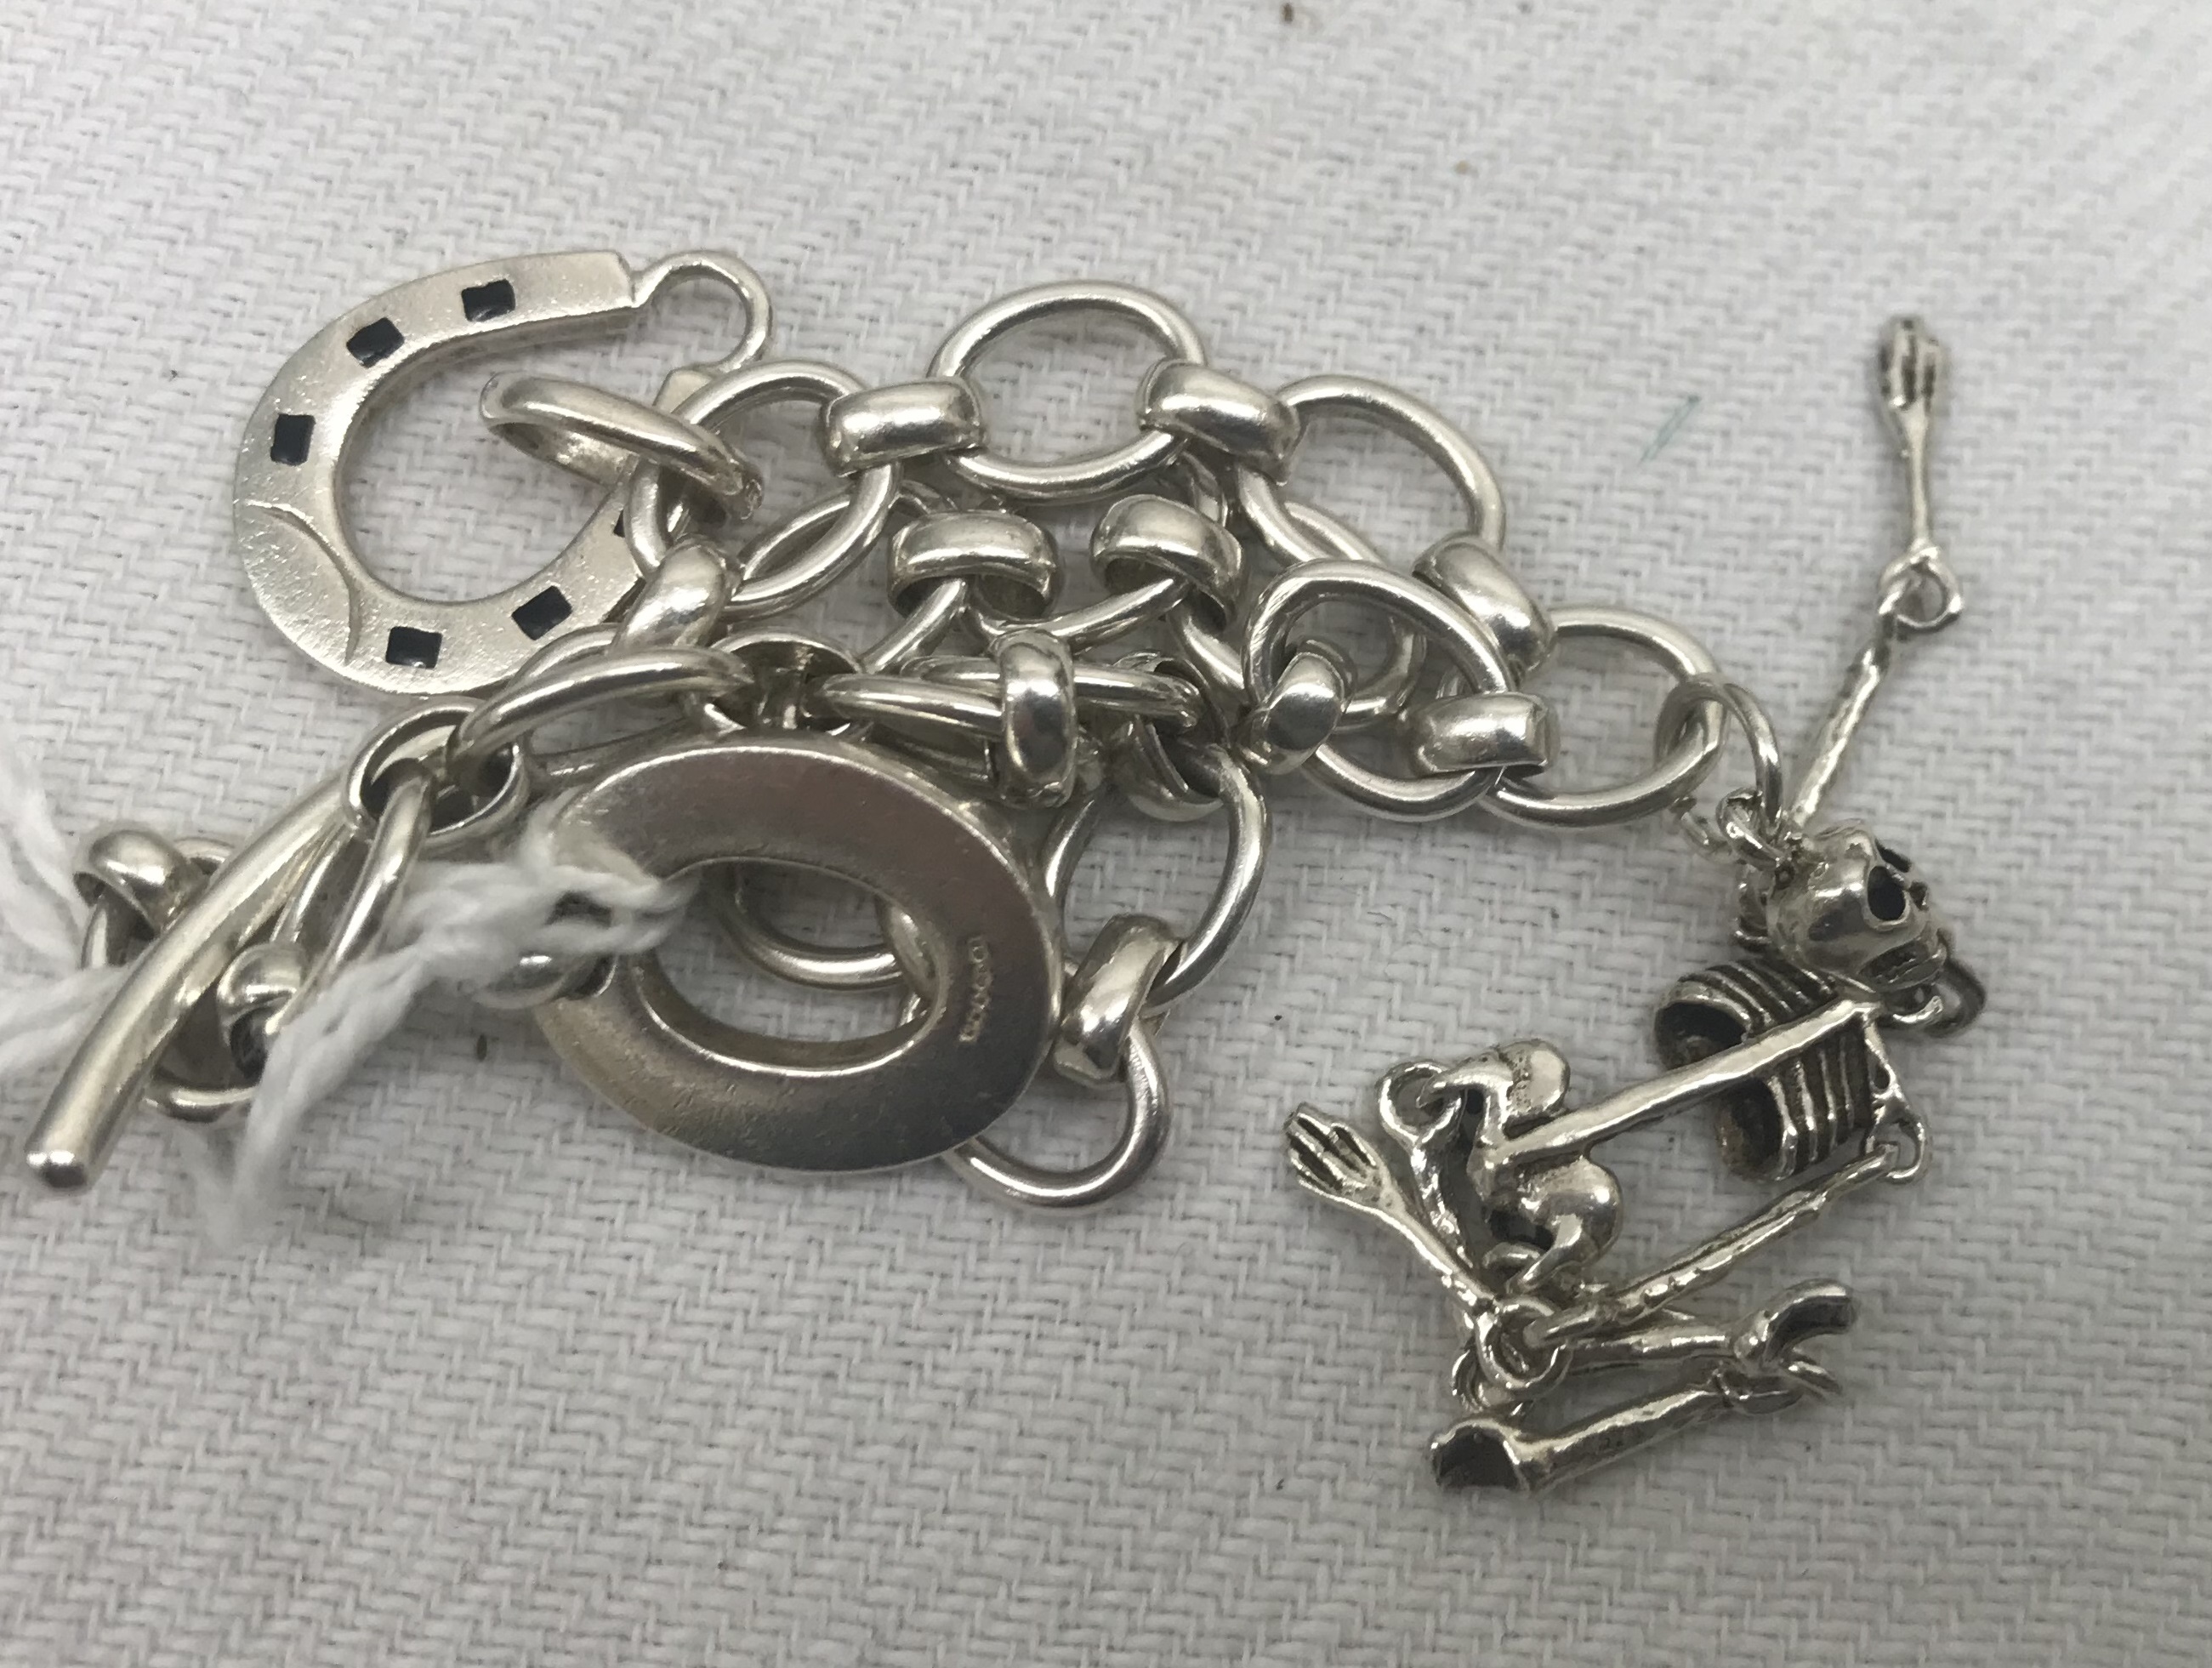 A Links of London bracelet and charms